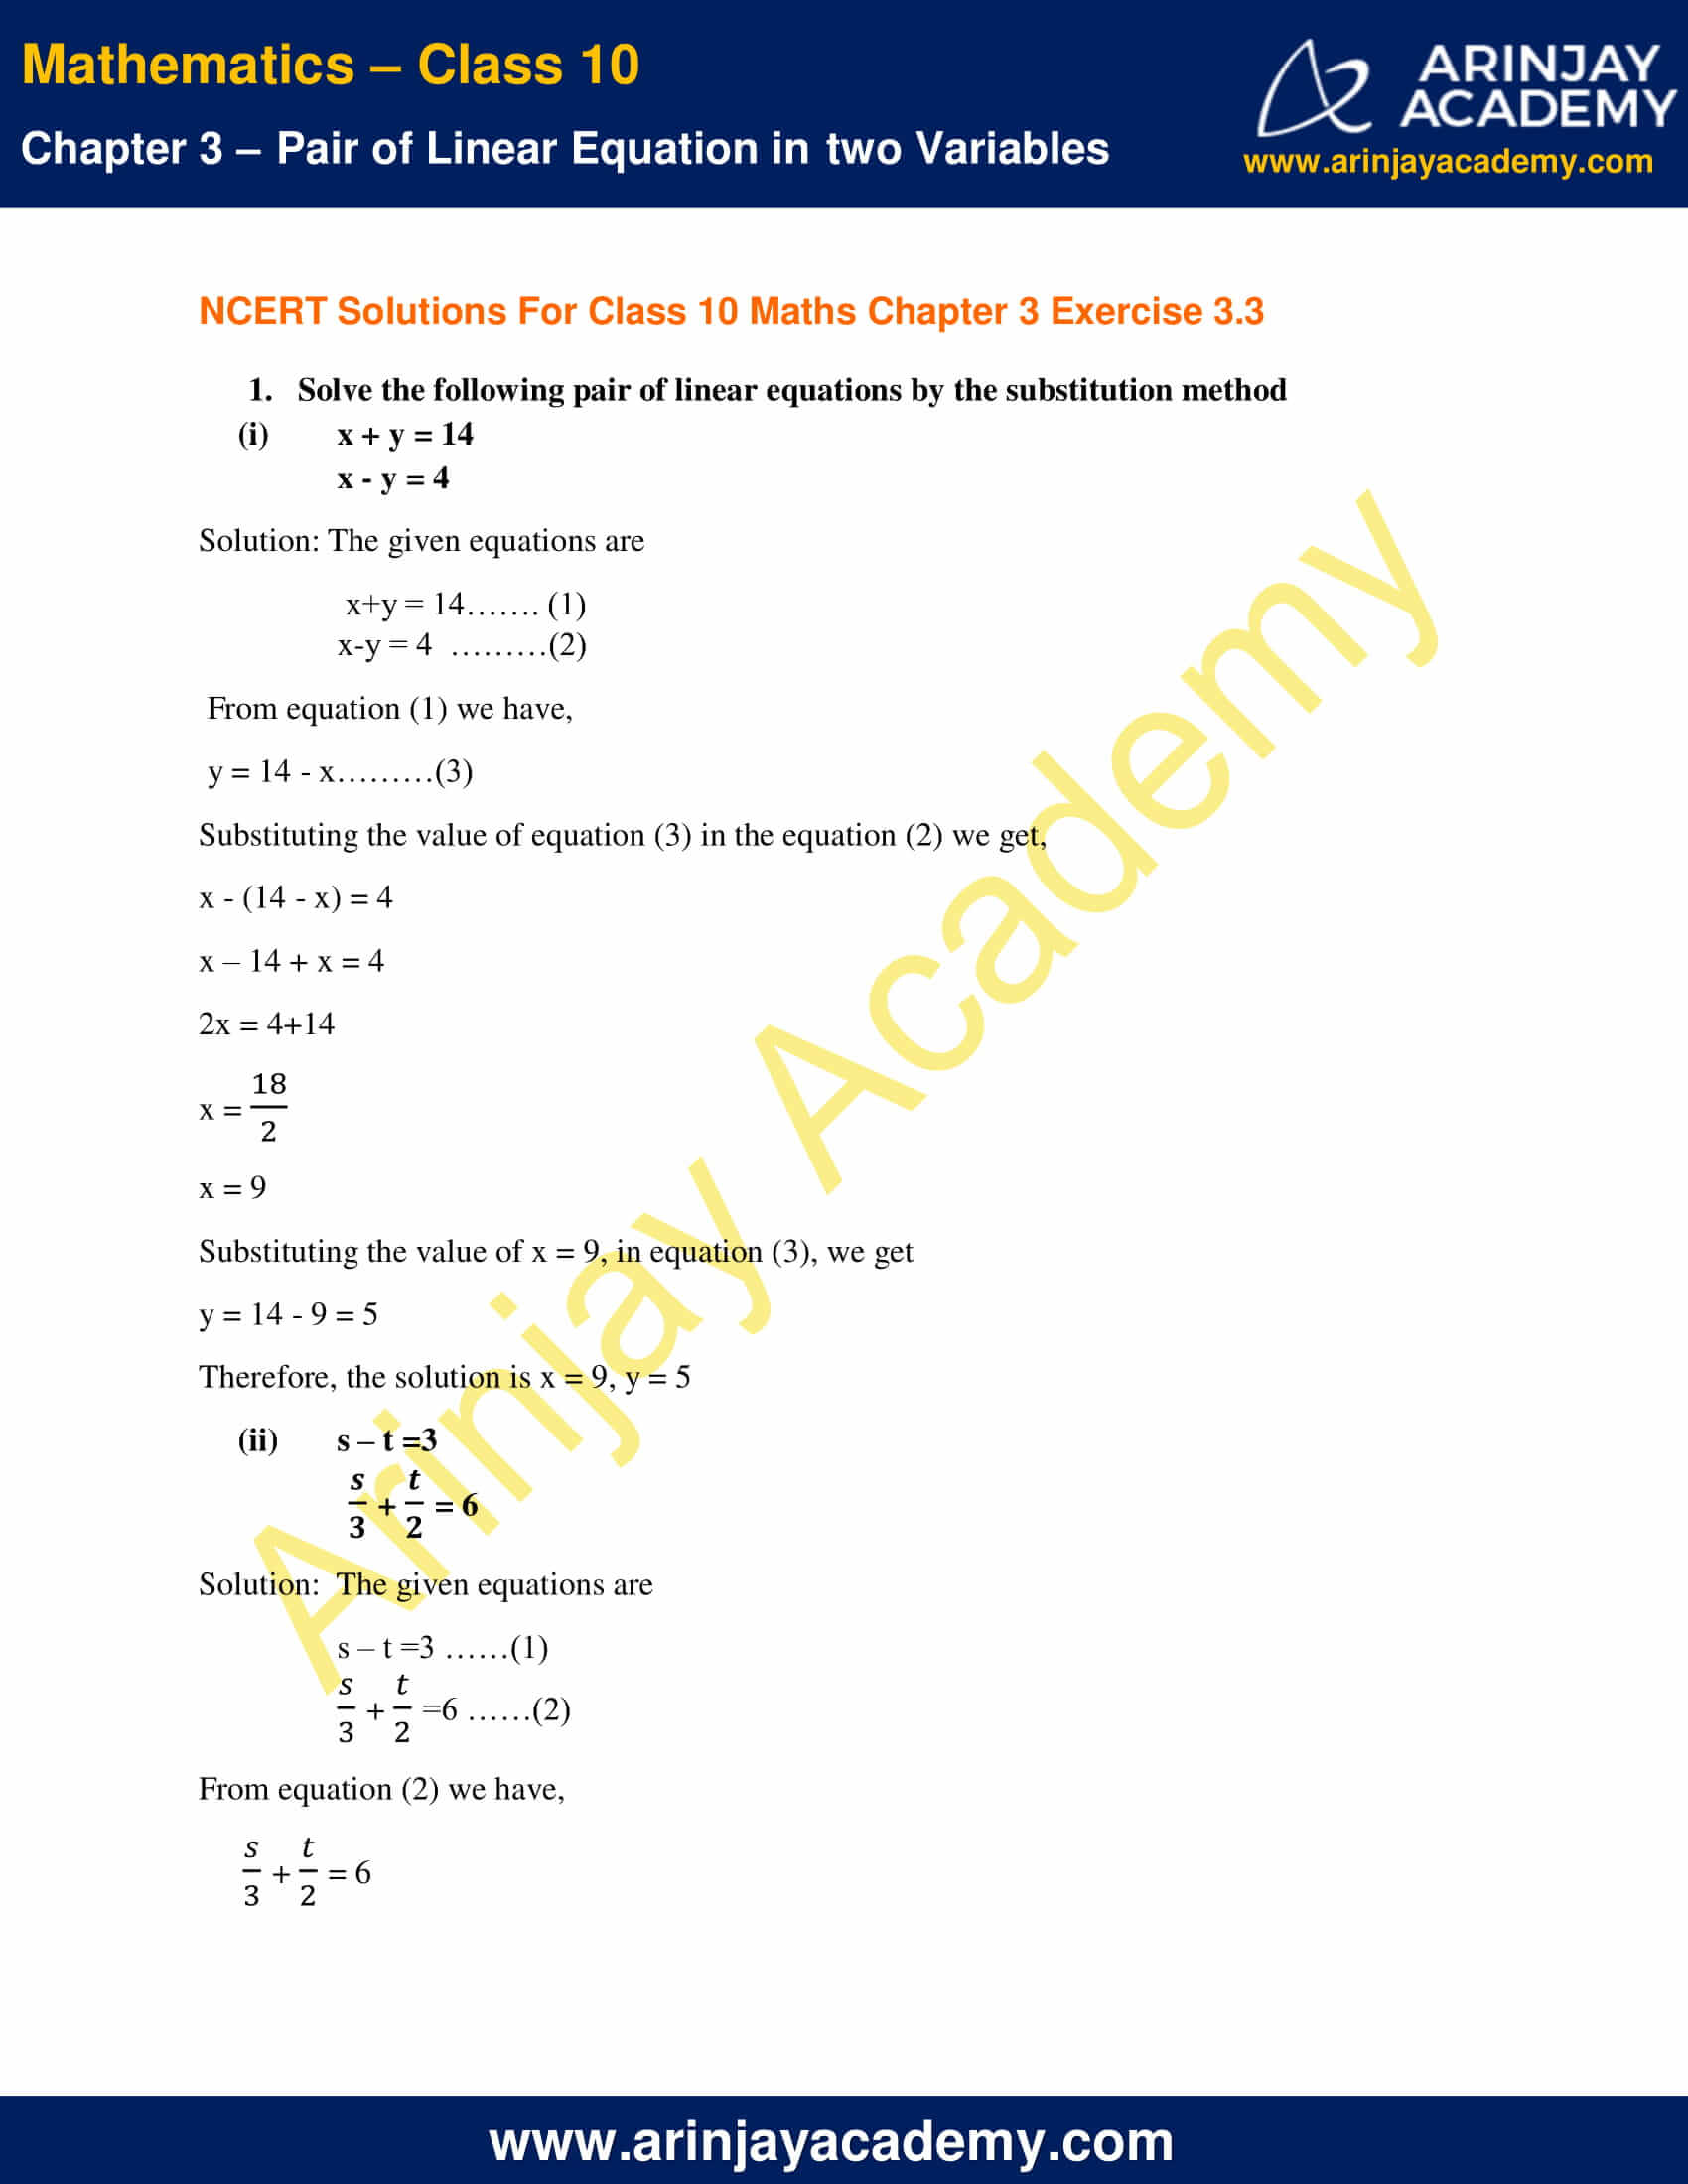 NCERT Solutions For Class 10 Maths Chapter 3 Exercise 3.3 image 1